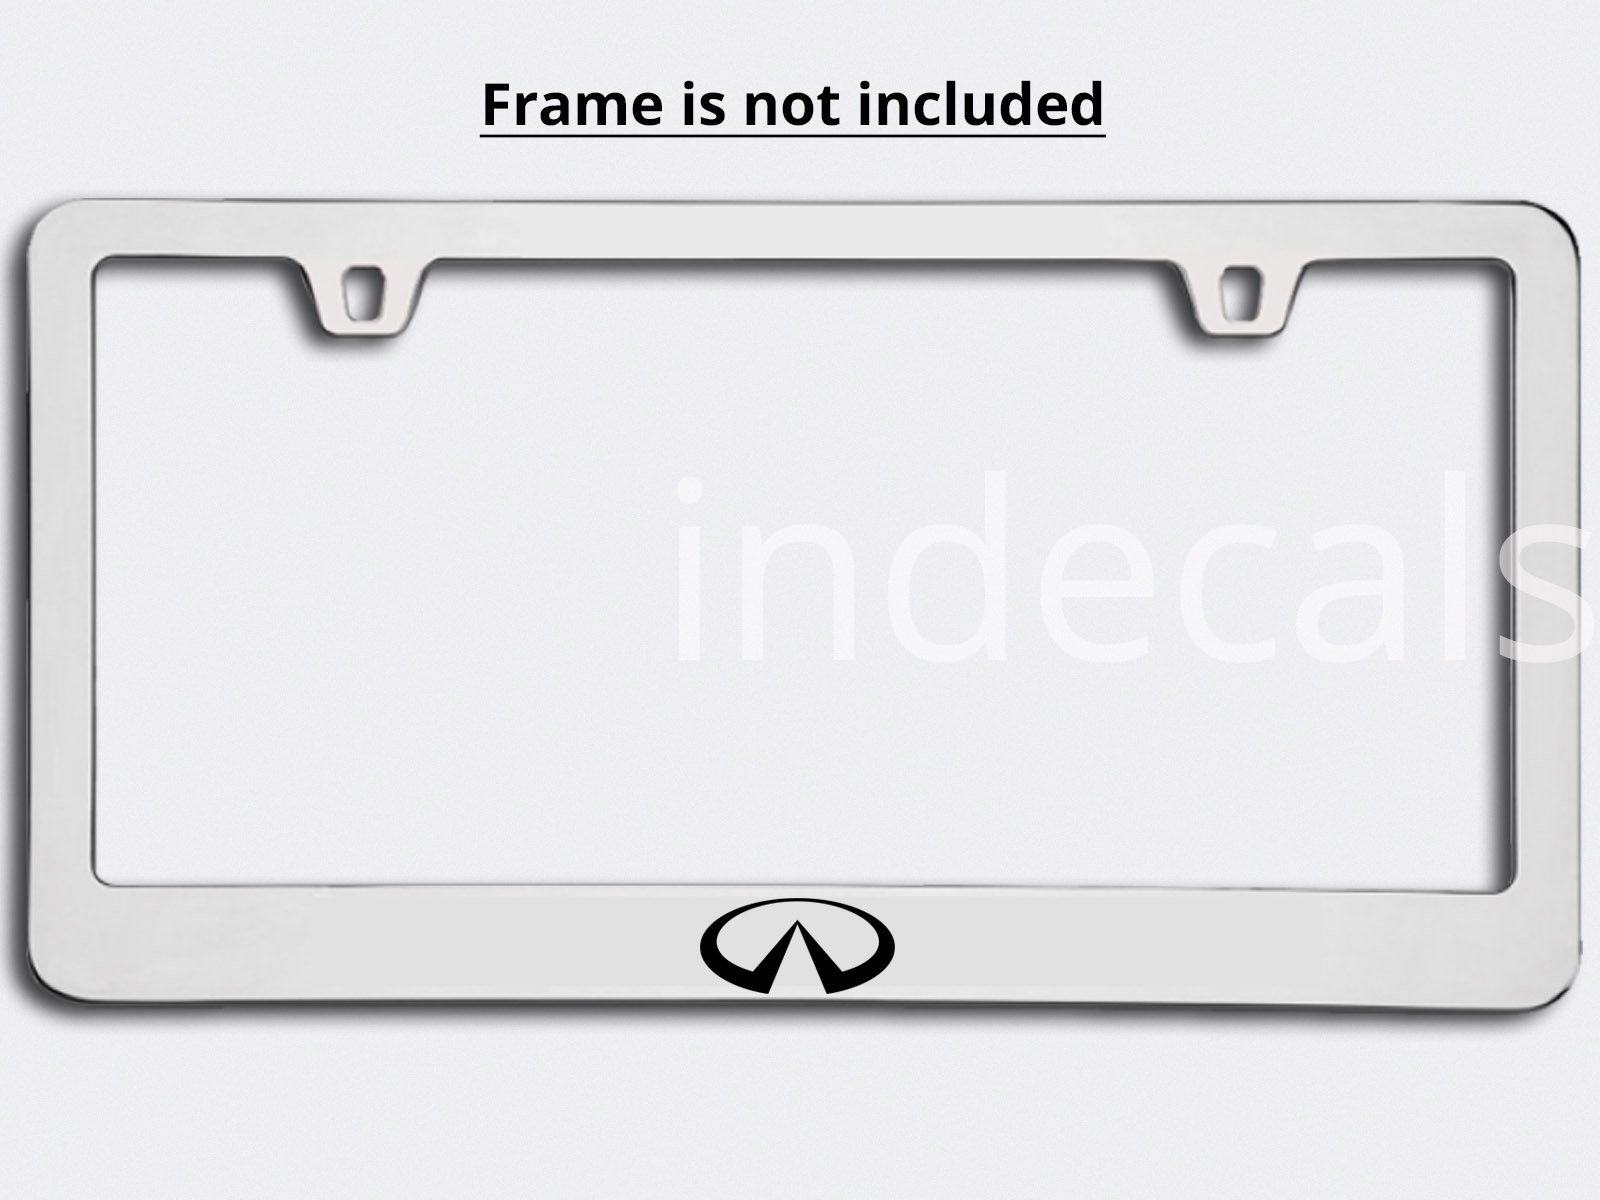 3 x Infiniti Stickers for License Plate Frame - Black